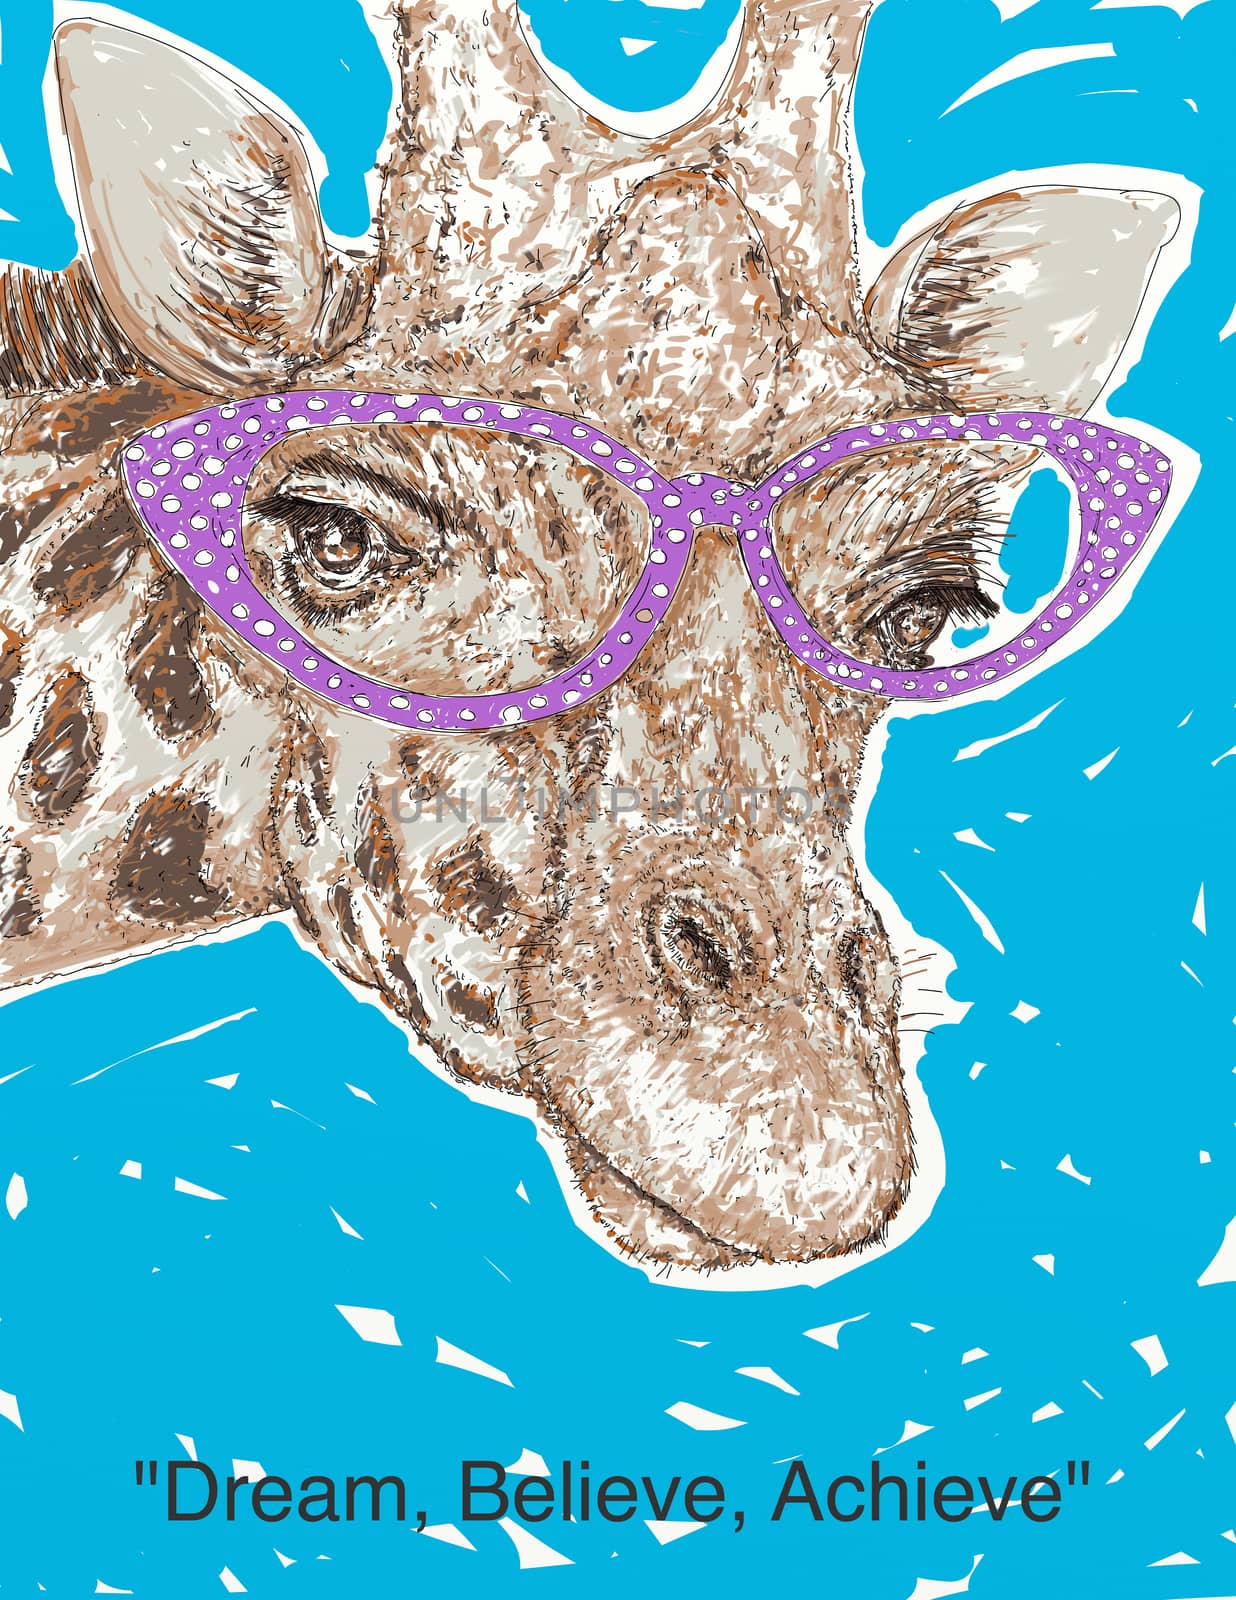 A giraffe with pink glasses